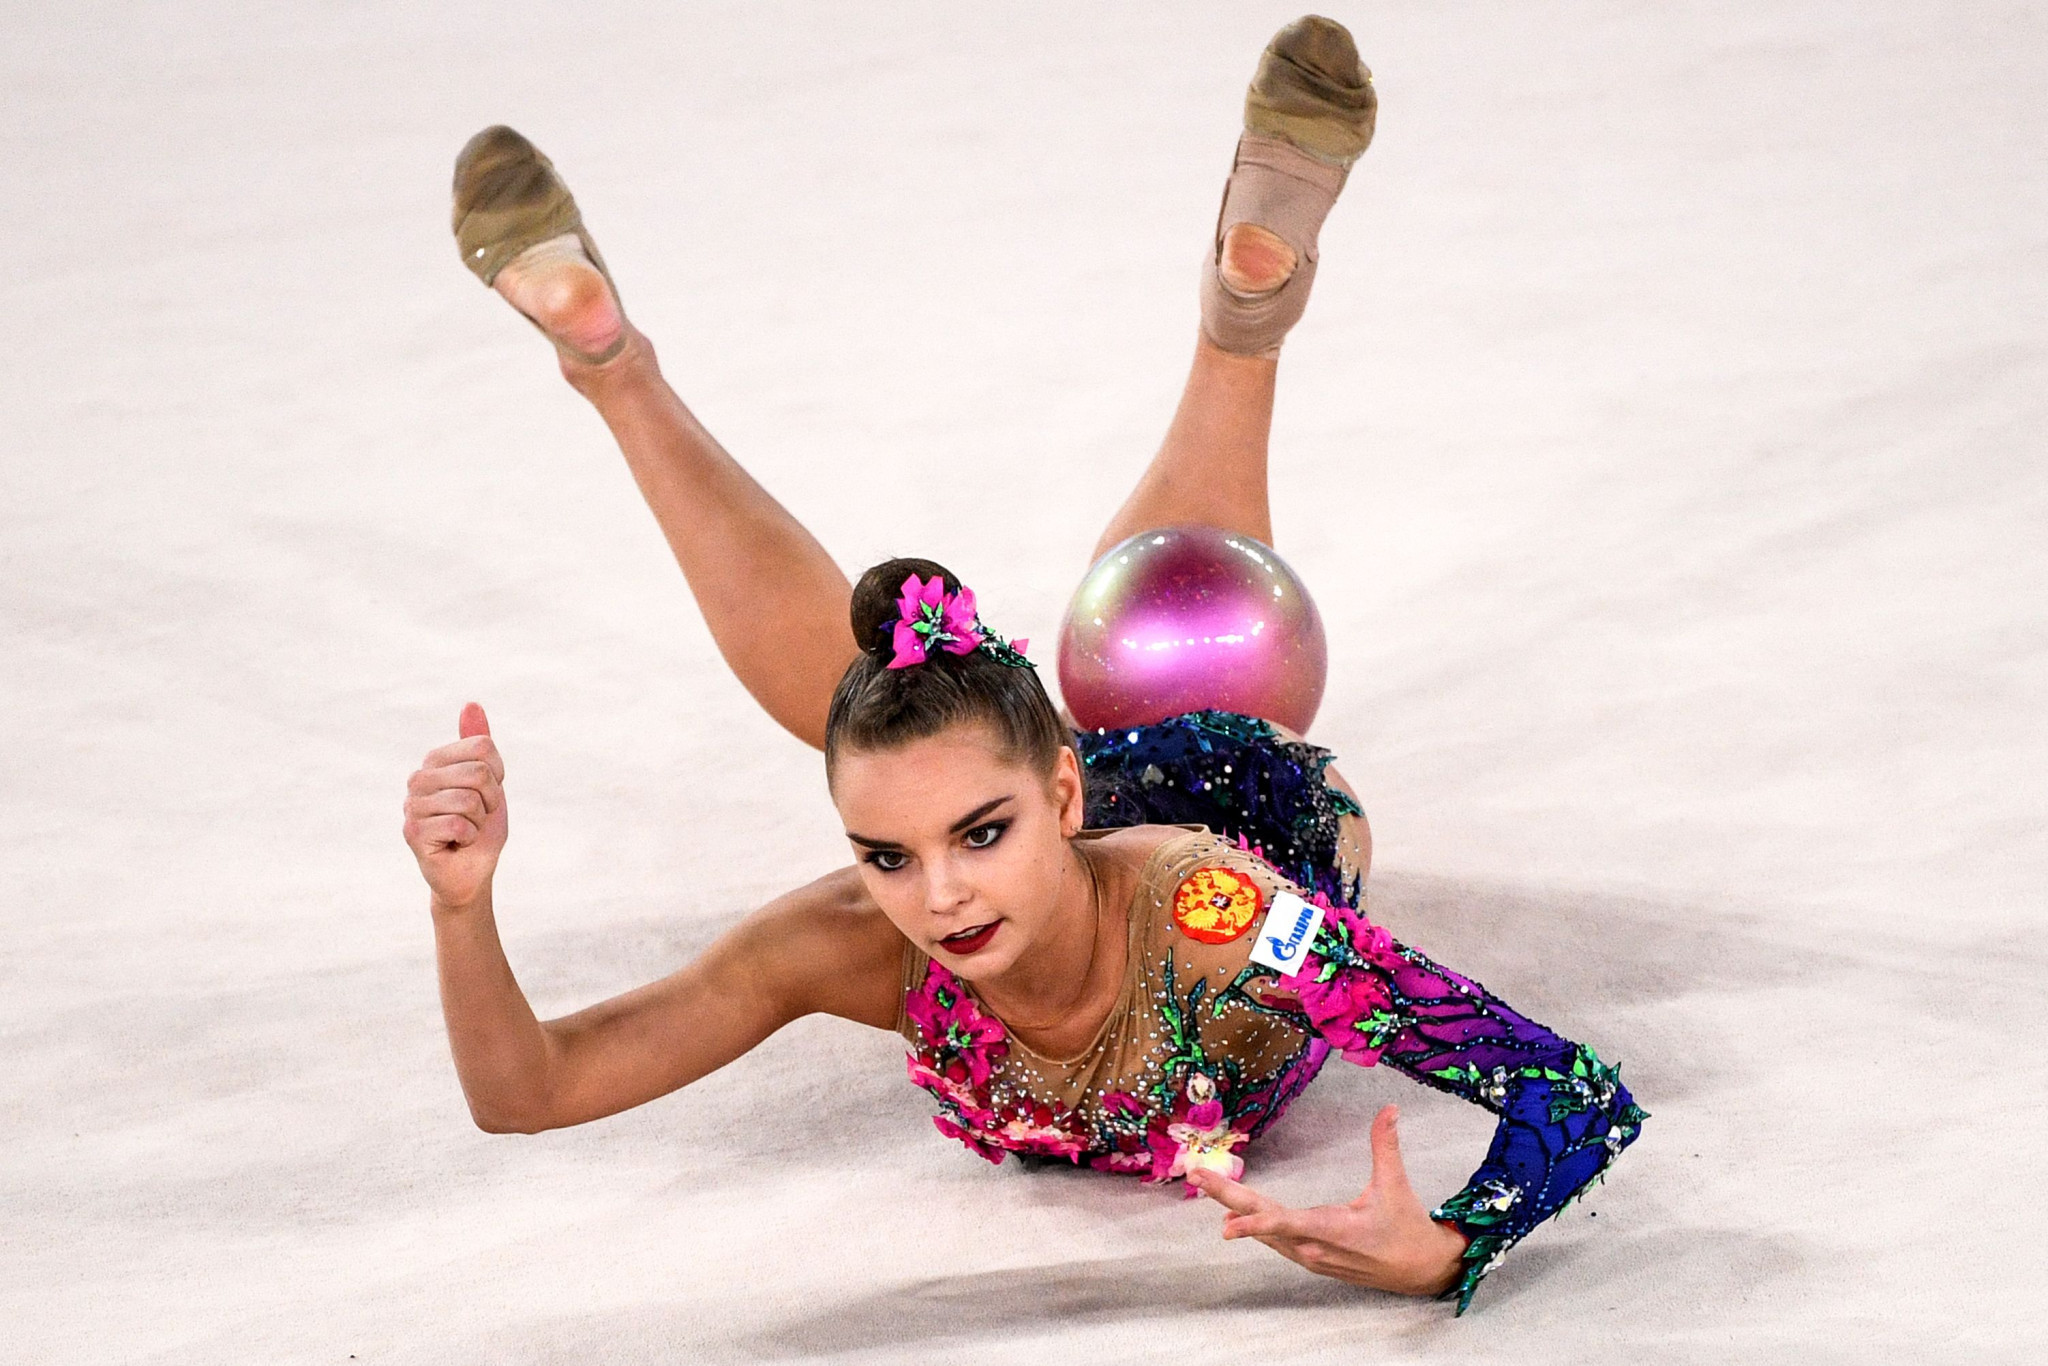 Averina twins to be star attraction at FIG Grand Prix in Moscow